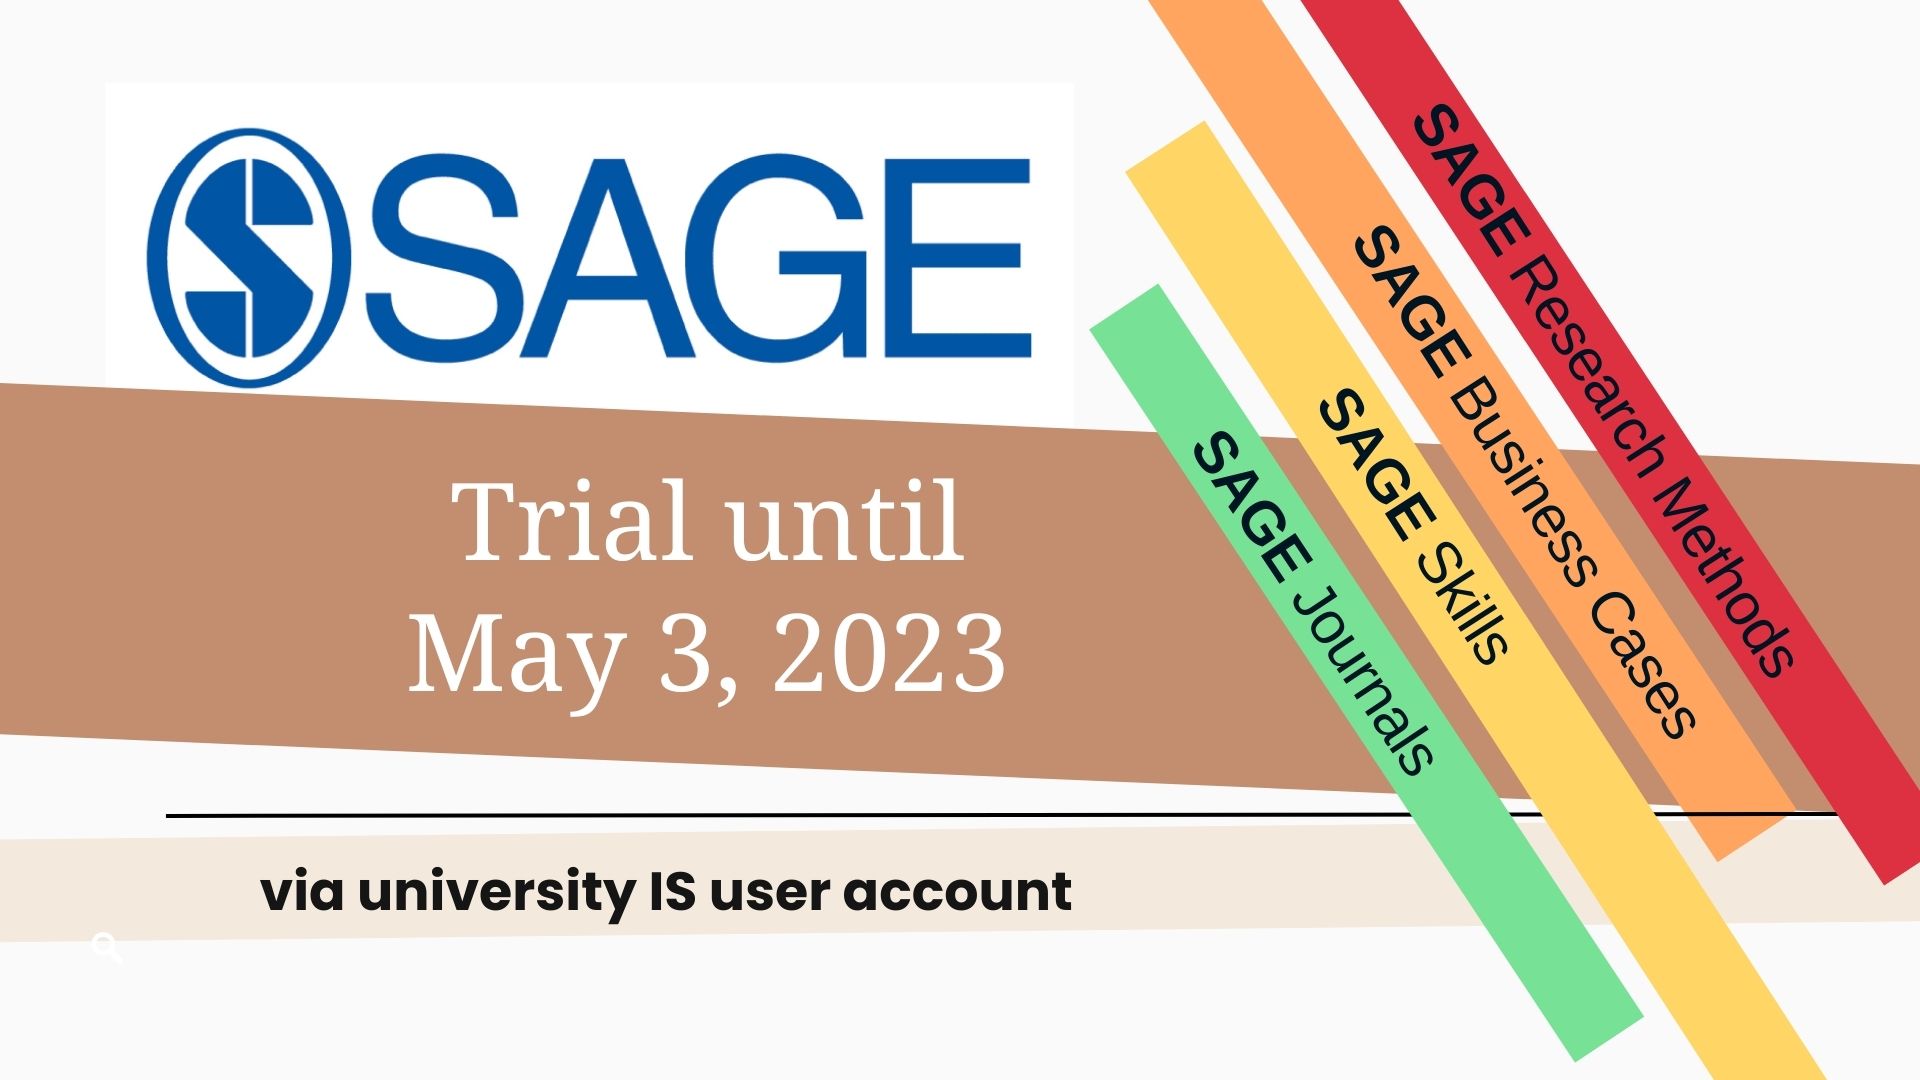 SAGE Journals, SAGE SKILLS: Business, SAGE Business Cases and SAGE Research Methods databases trial until May 3rd, 2023 at Latvia University of Life Sciences and Technologies 